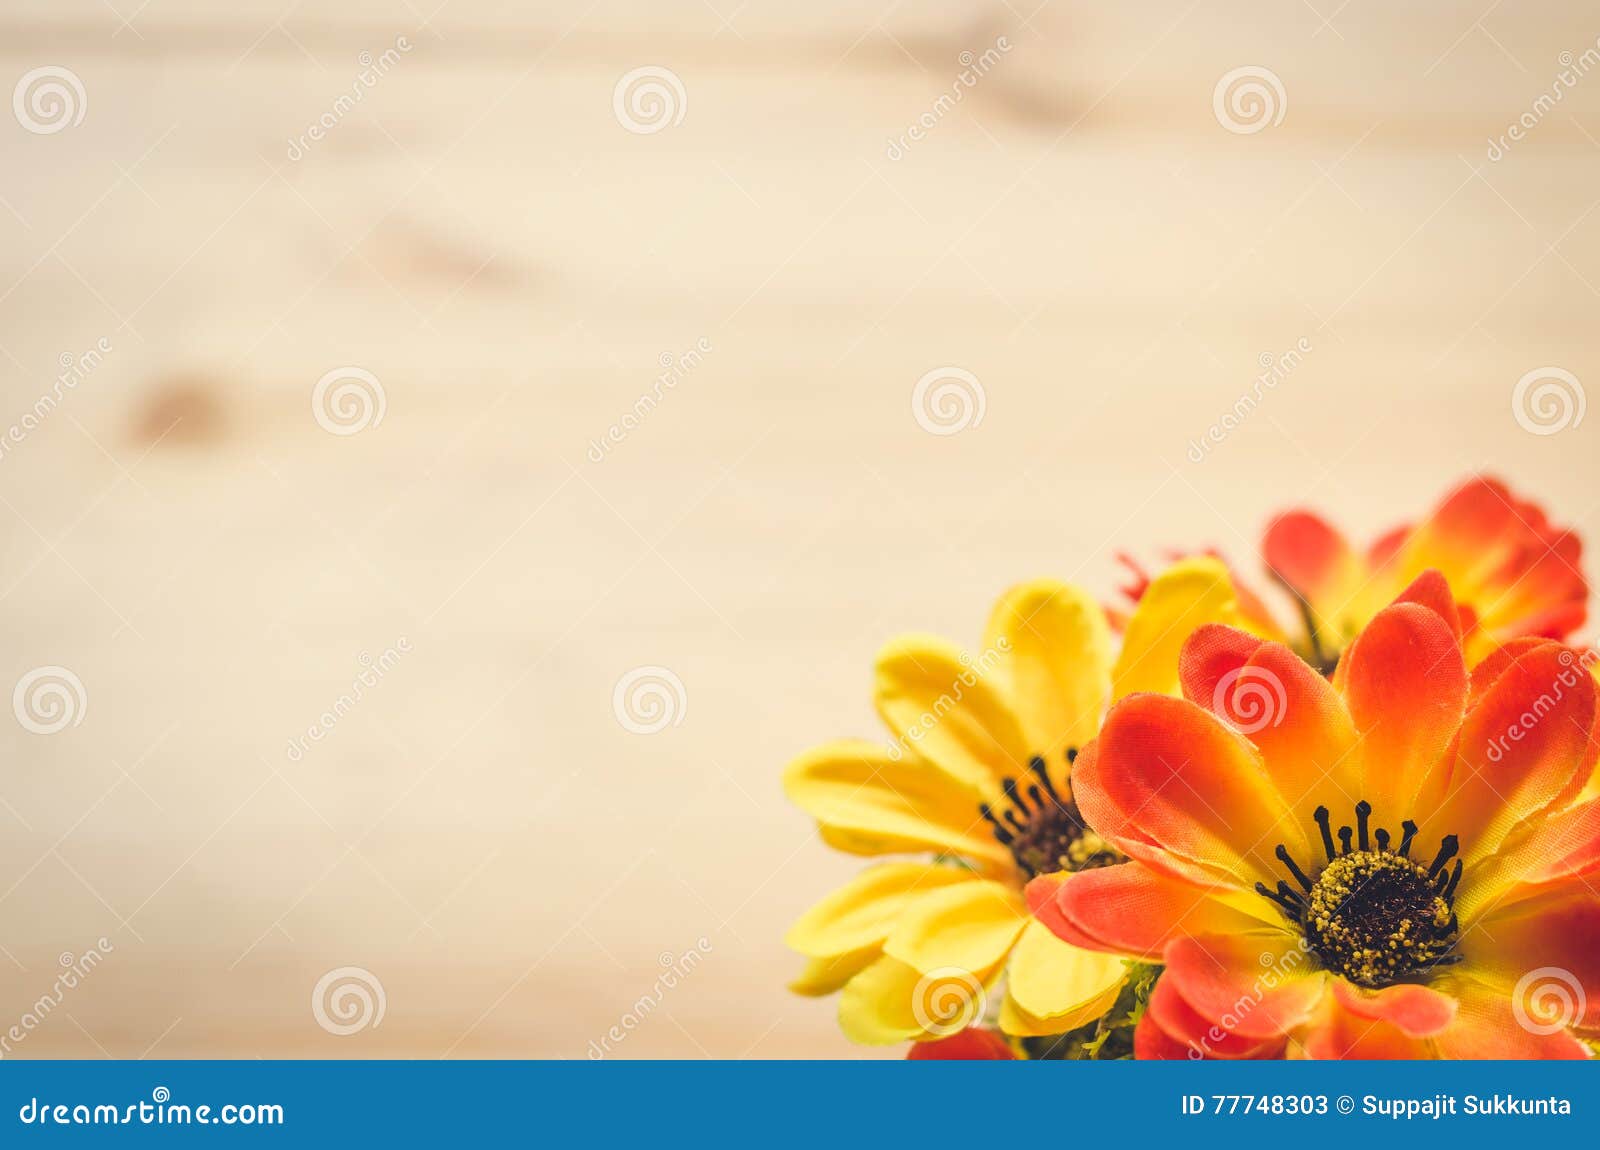 Flowers and Pot on the Office Desk. Vintage Tone Stock Image - Image of ...